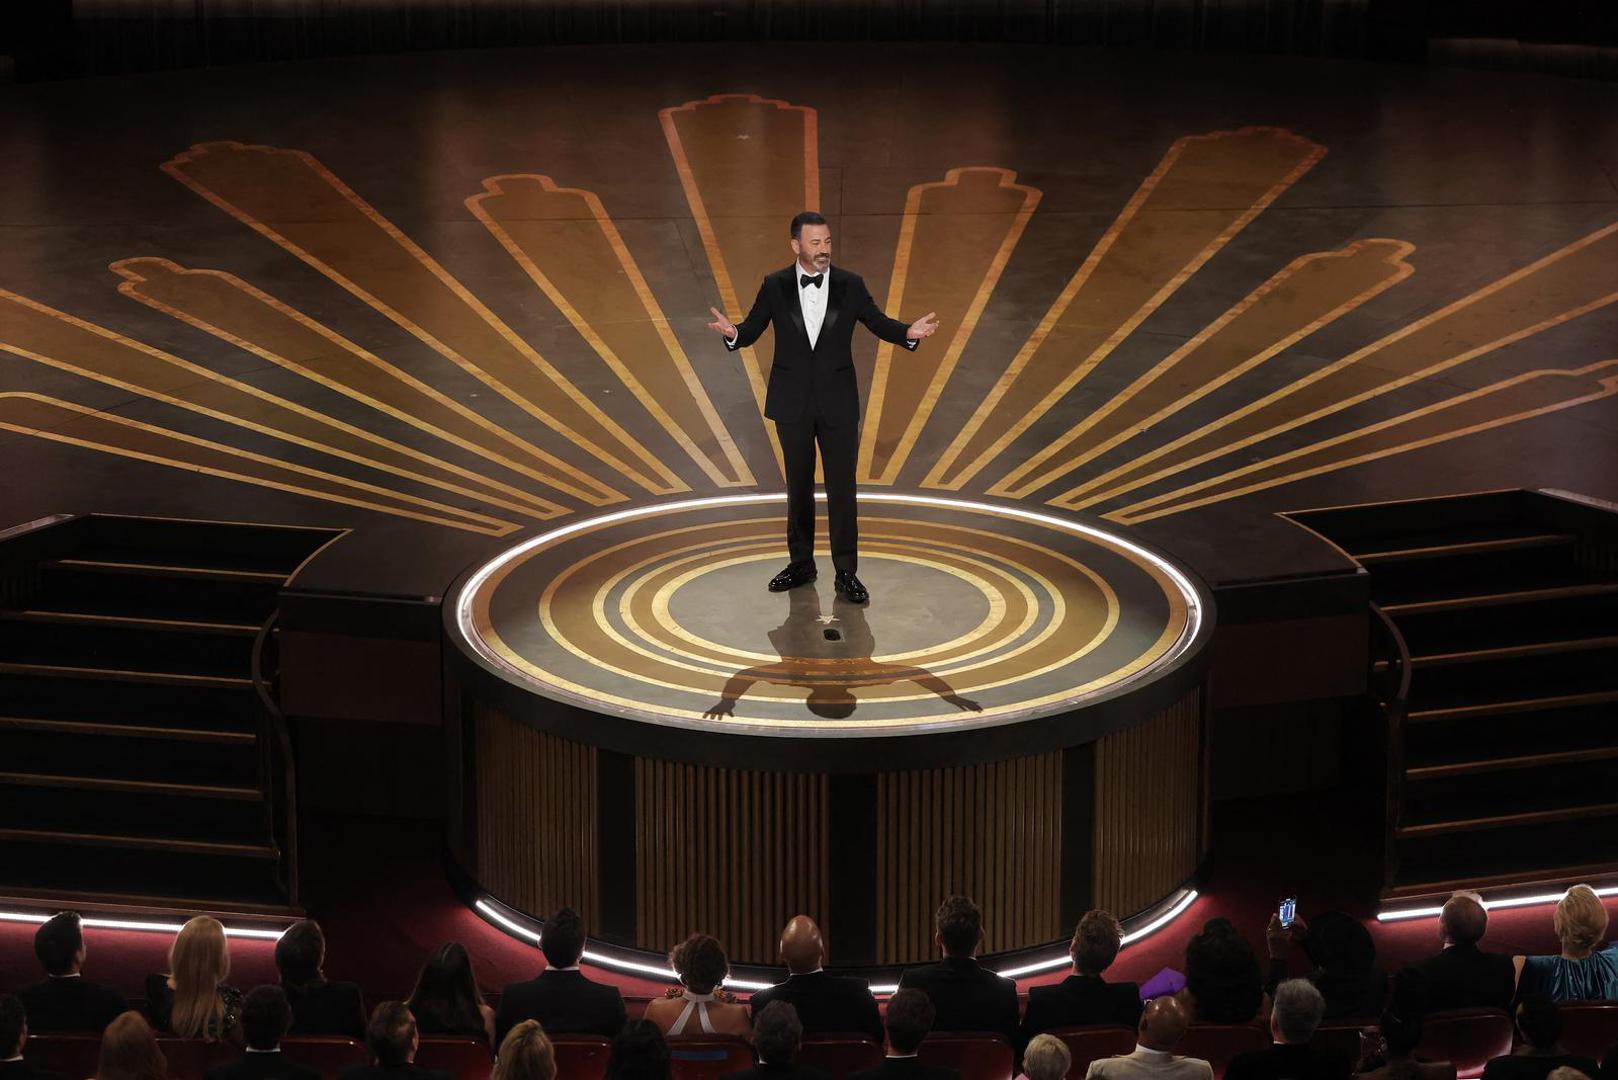 Jimmy Kimmel hosts the Oscars show at the 95th Academy Awards in Hollywood, Los Angeles, California, U.S., March 12, 2023. REUTERS/Carlos Barria Photo: CARLOS BARRIA/REUTERS